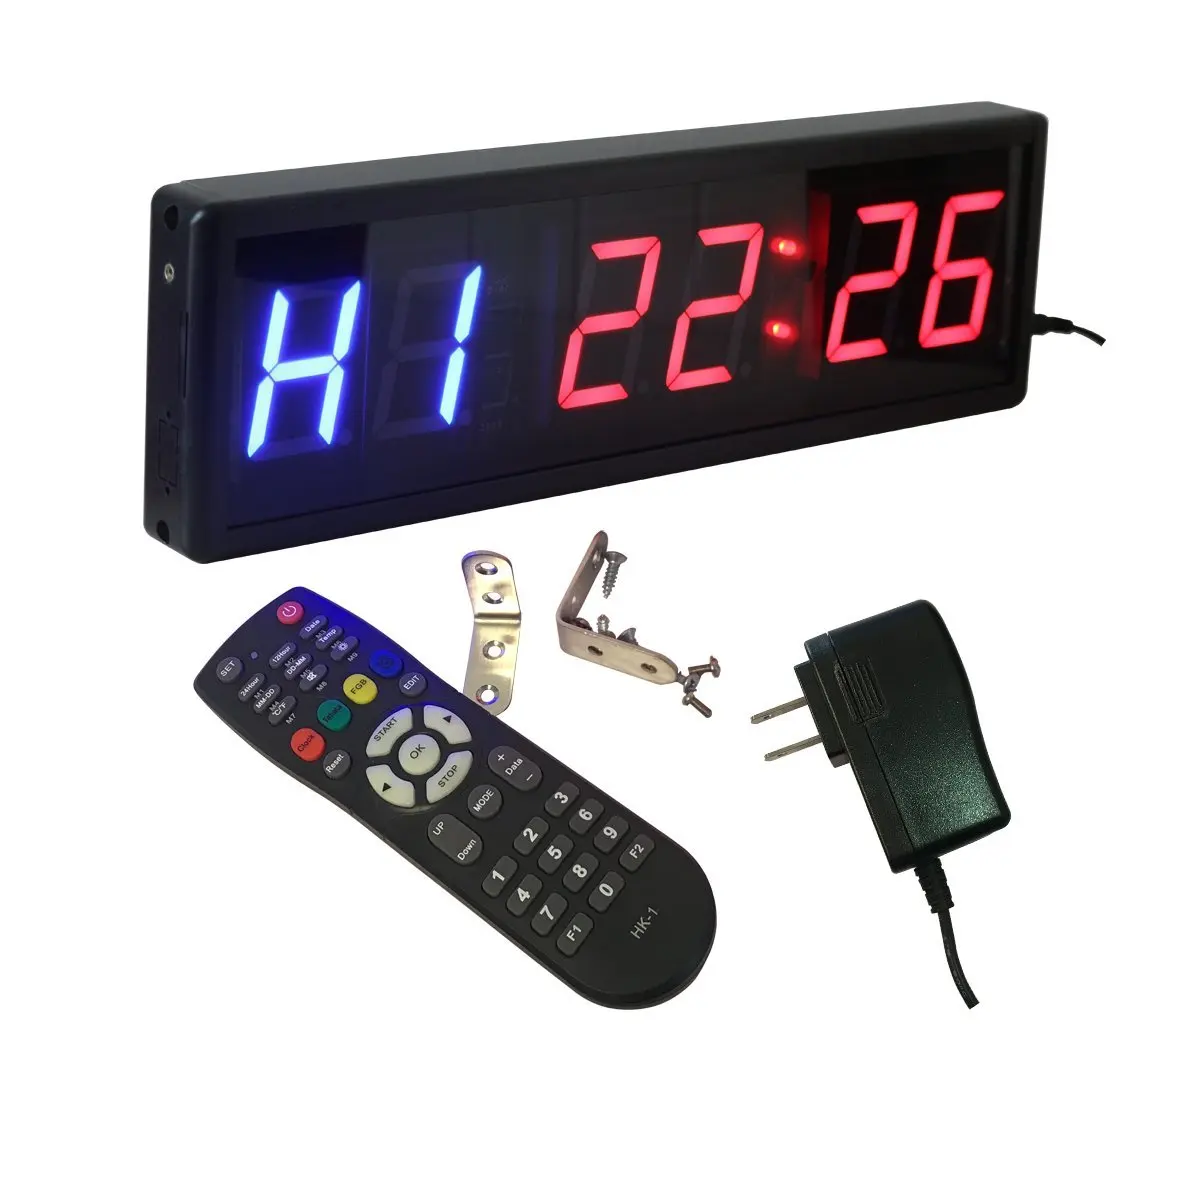 real time clock with seconds